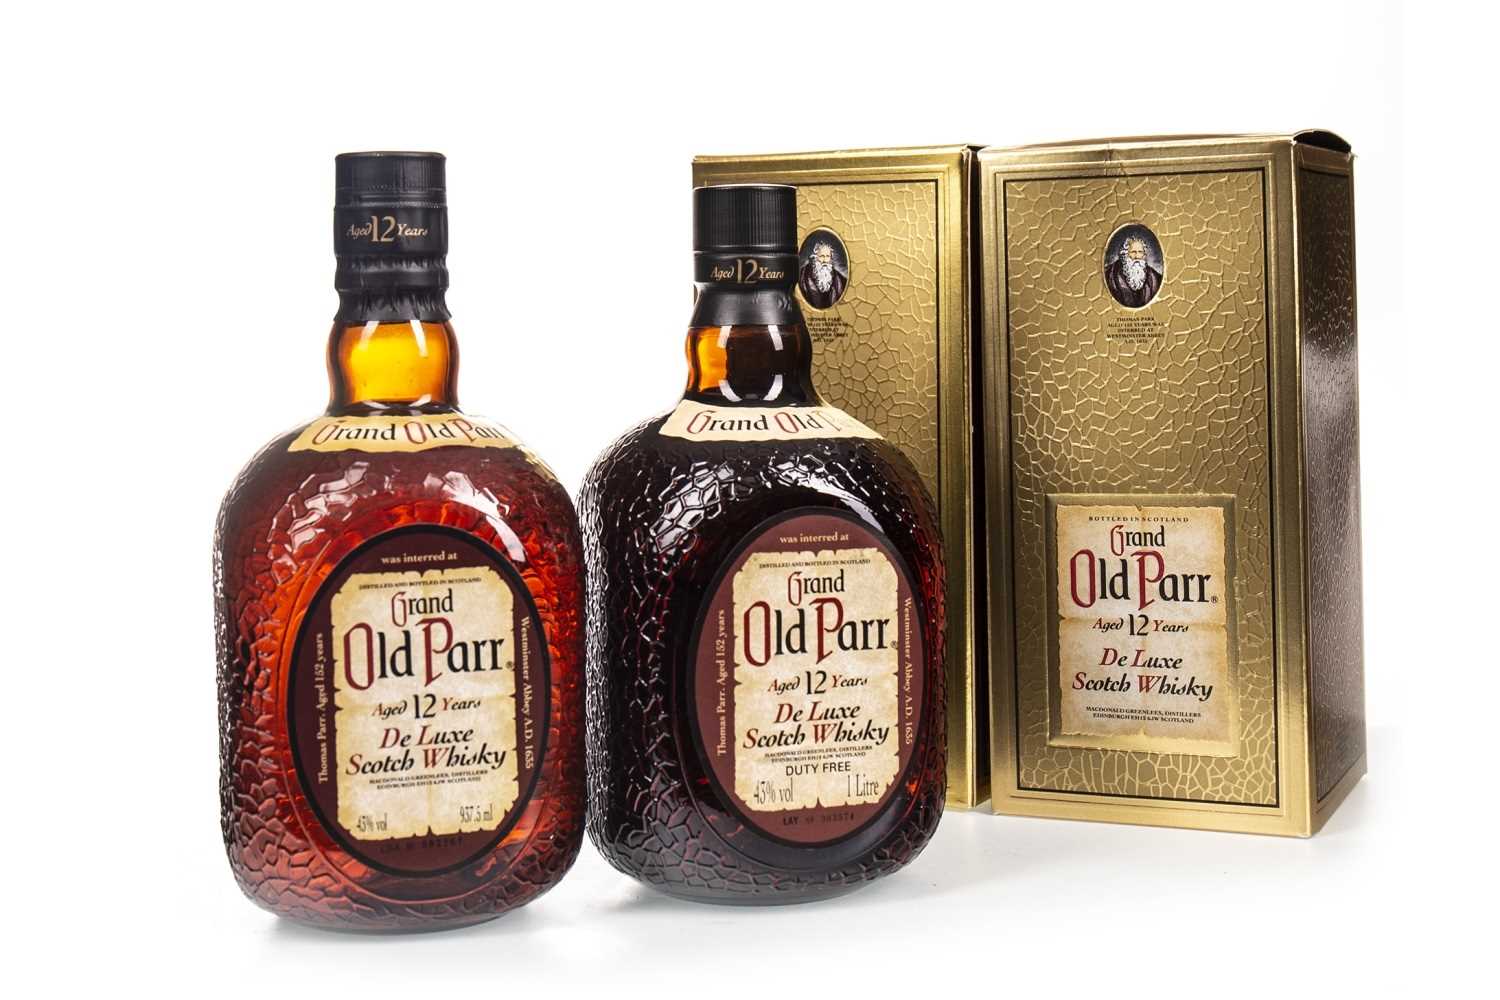 Lot 415 - TWO BOTTLES OF GRAND OLD PARR AGED 12 YEARS